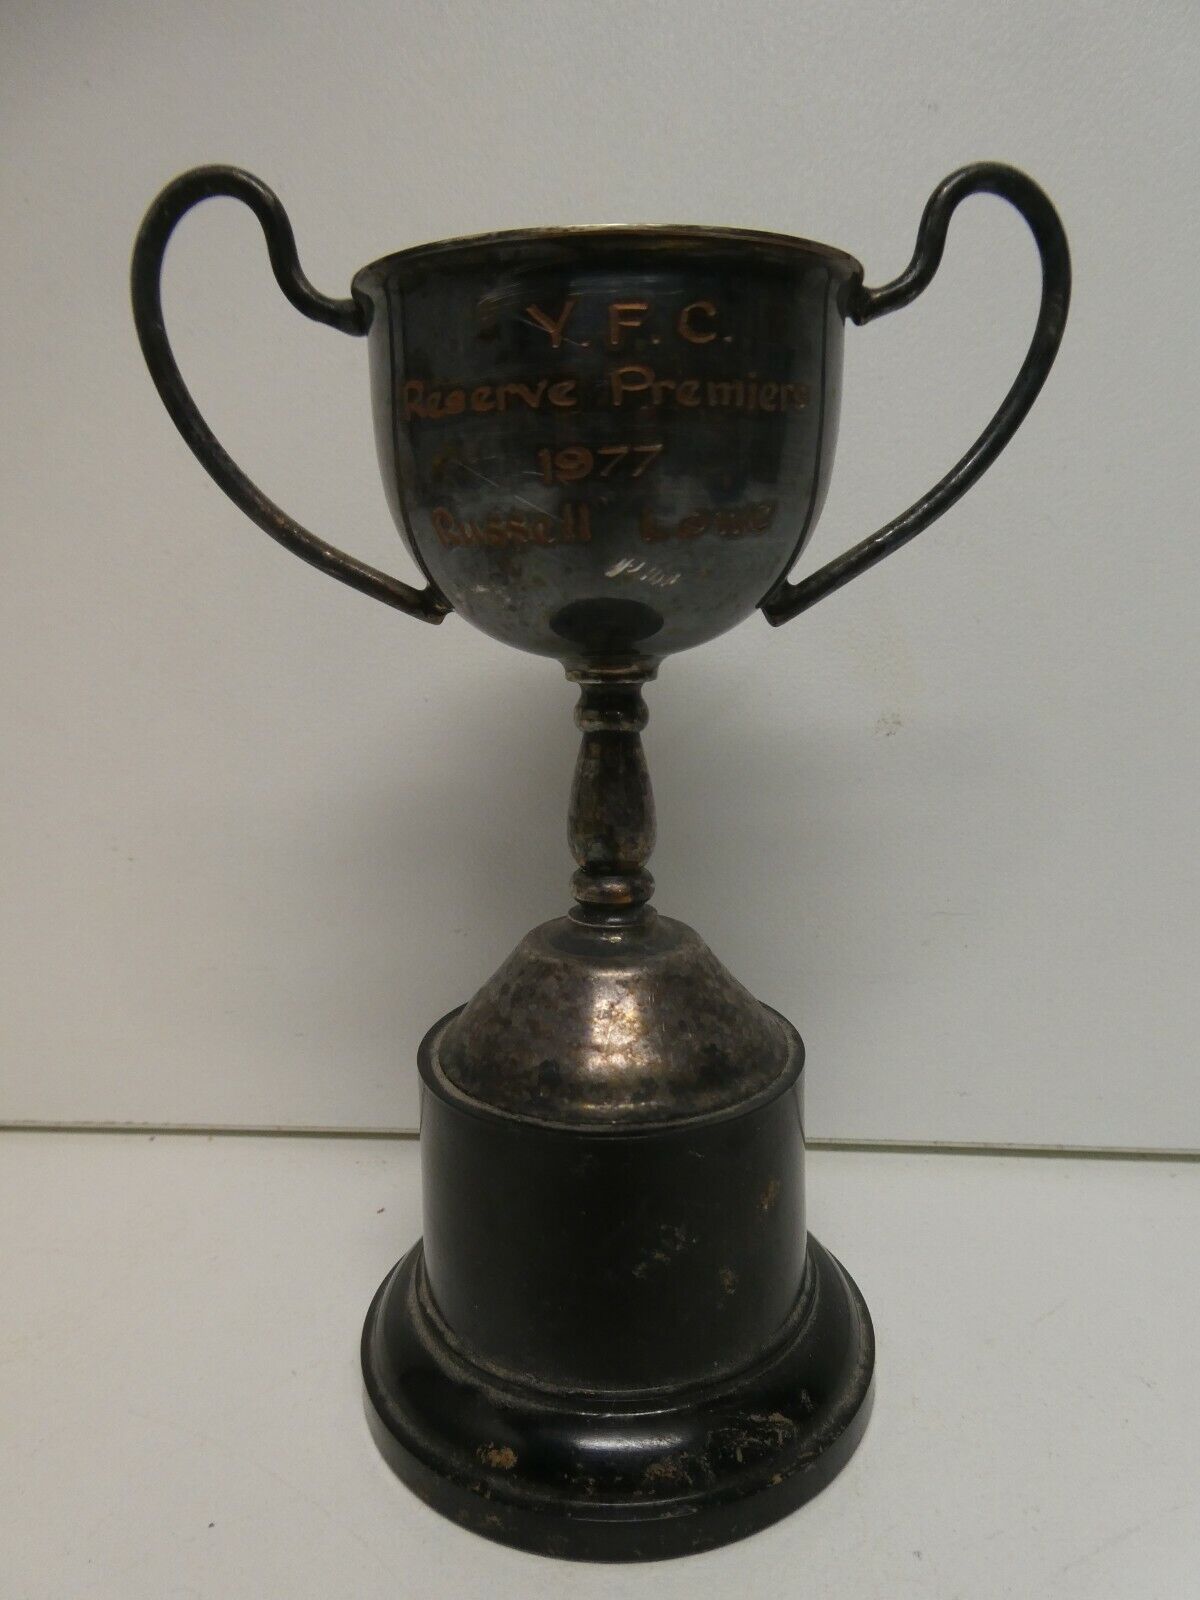 SMALL YFC SILVER PLATED BAKELITE BASE 2 HANDLE TROPHY CUP